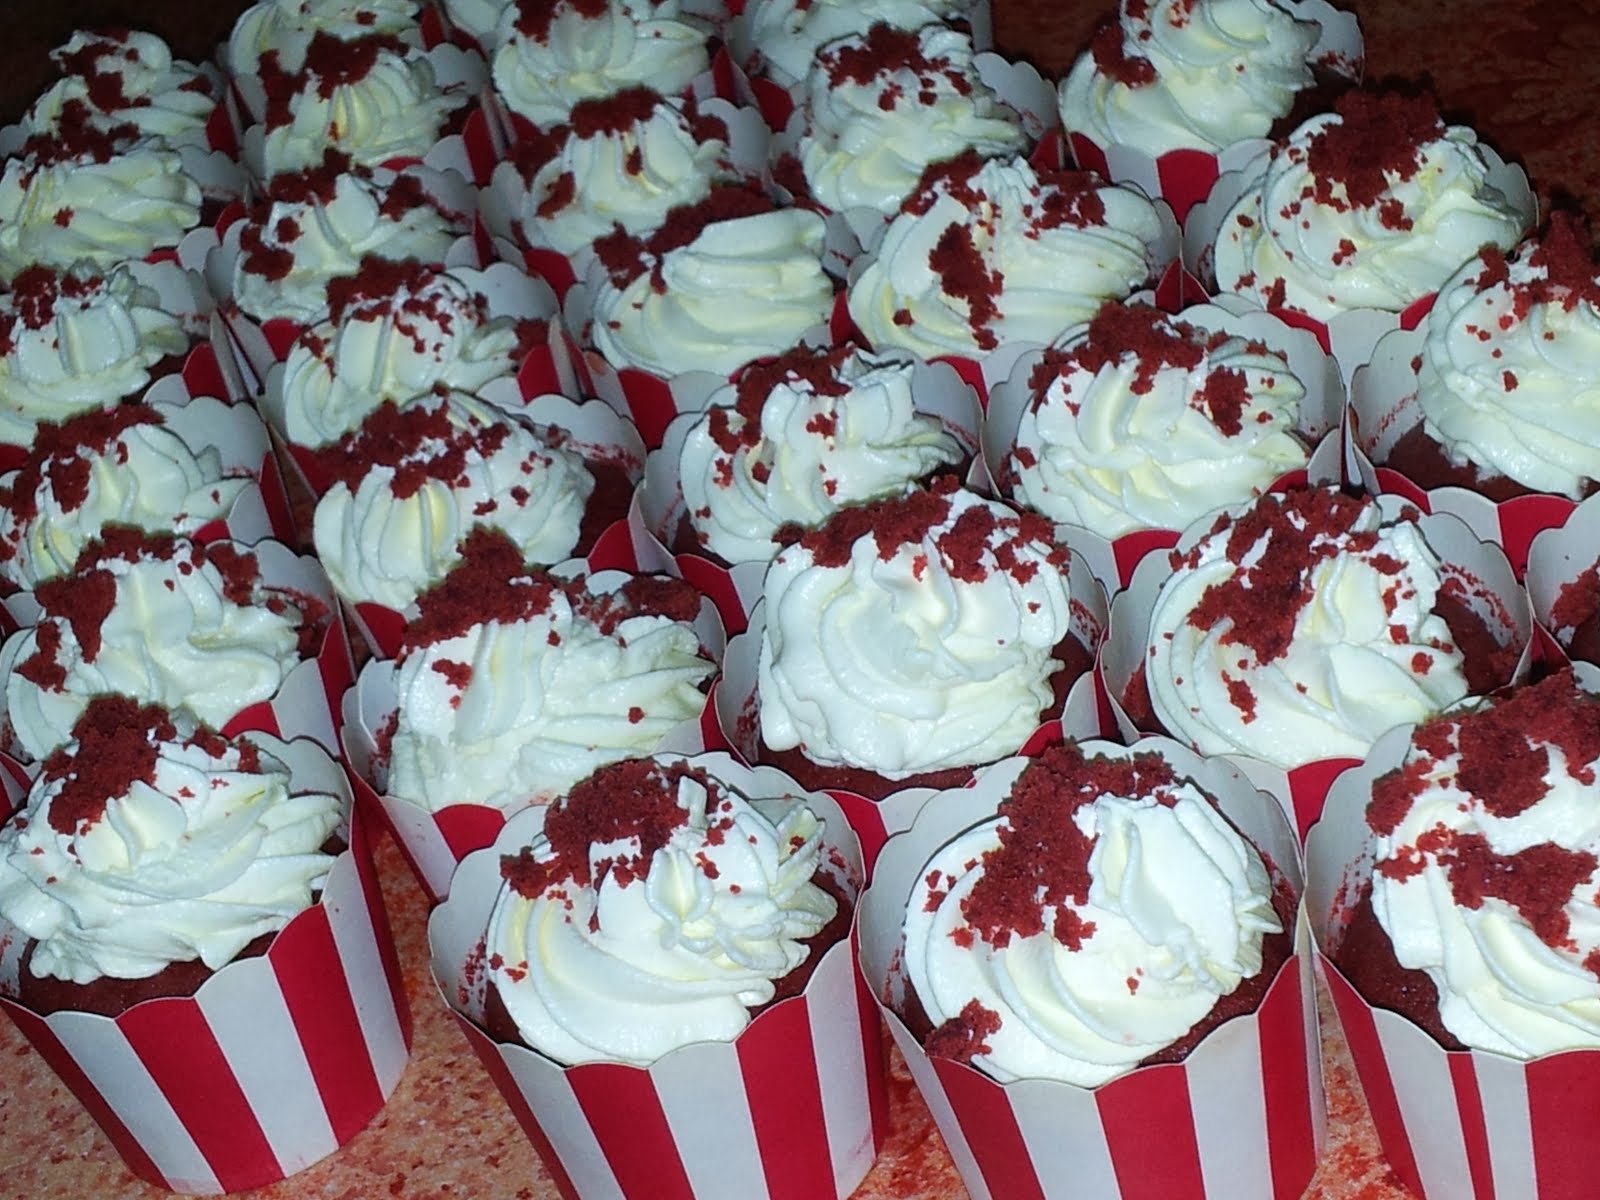 Red Velvet Cupcakes with cream cheese topping